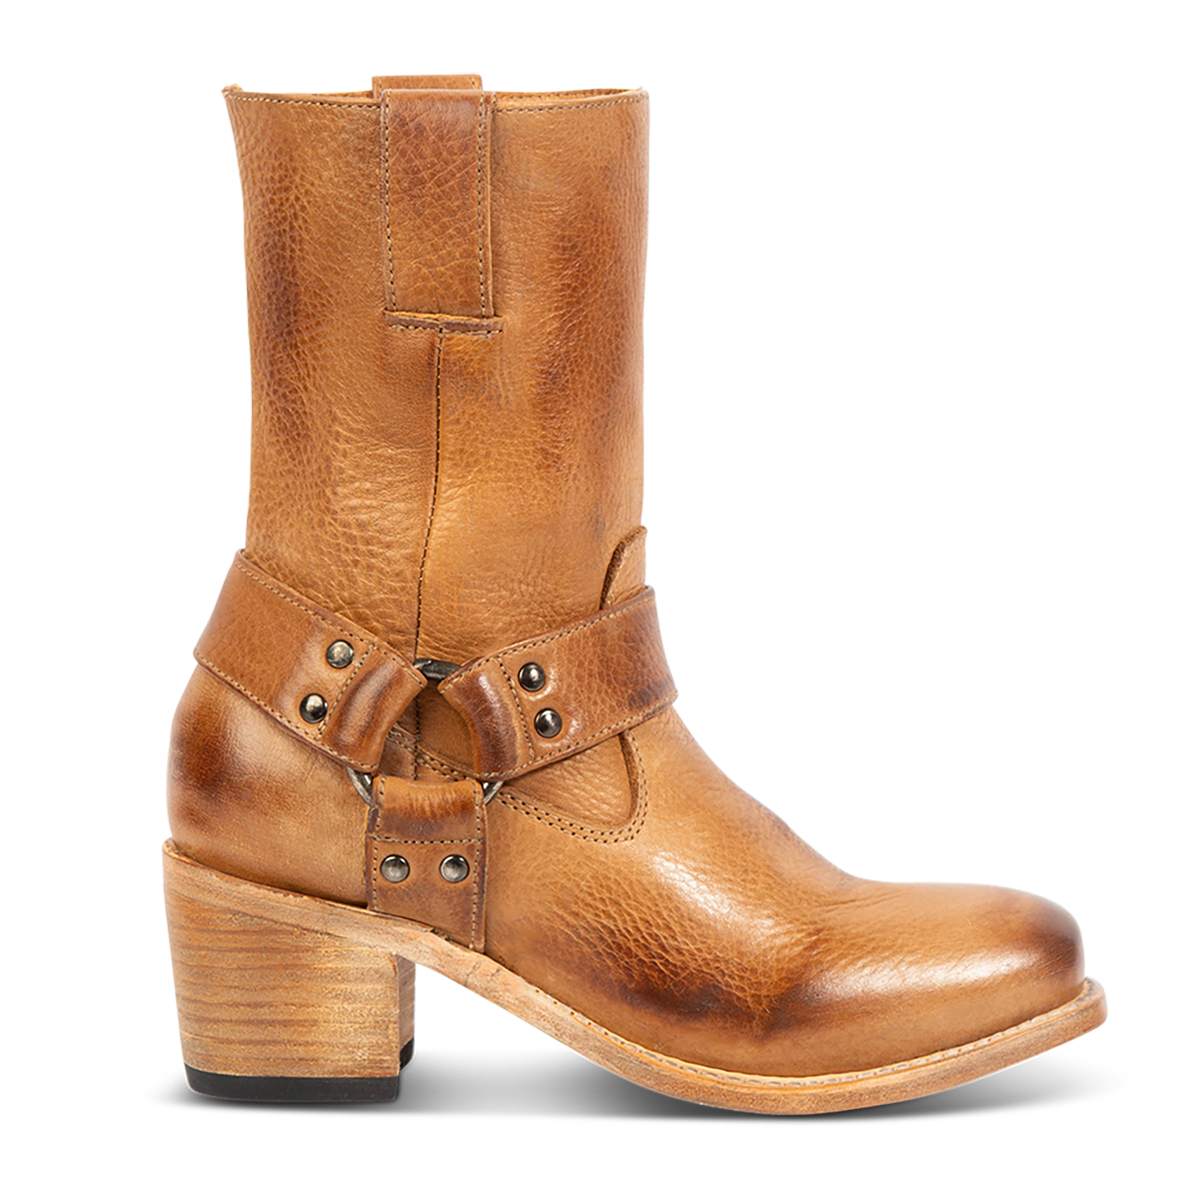 FREEBIRD women's Darcy wheat leather boot with a studded ankle harness, leather pull straps and a square toe